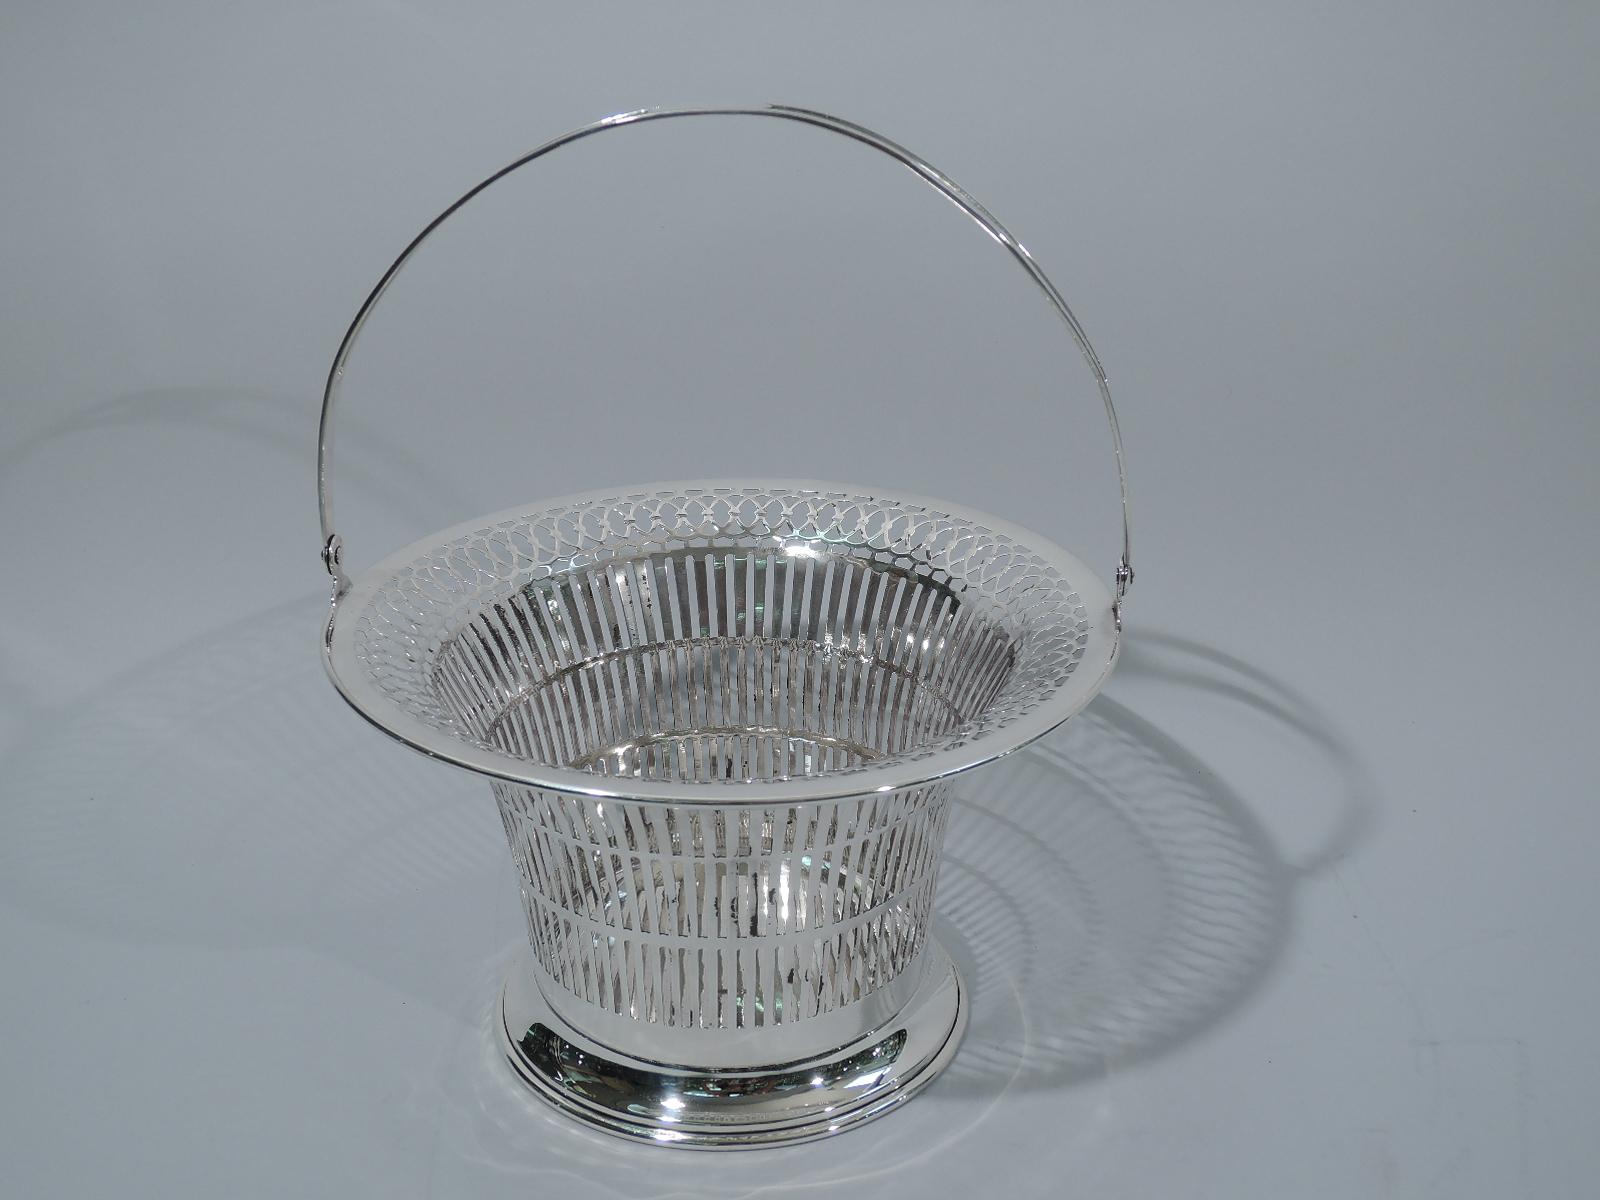 Edwardian sterling silver bucket basket. Made by Meriden Britannia (part of International) in Meriden, Conn., circa 1915. Solid well and spread foot, flared rim, and open tapering c-scroll swing handle with tubular cartouche (vacant). Pierced lines